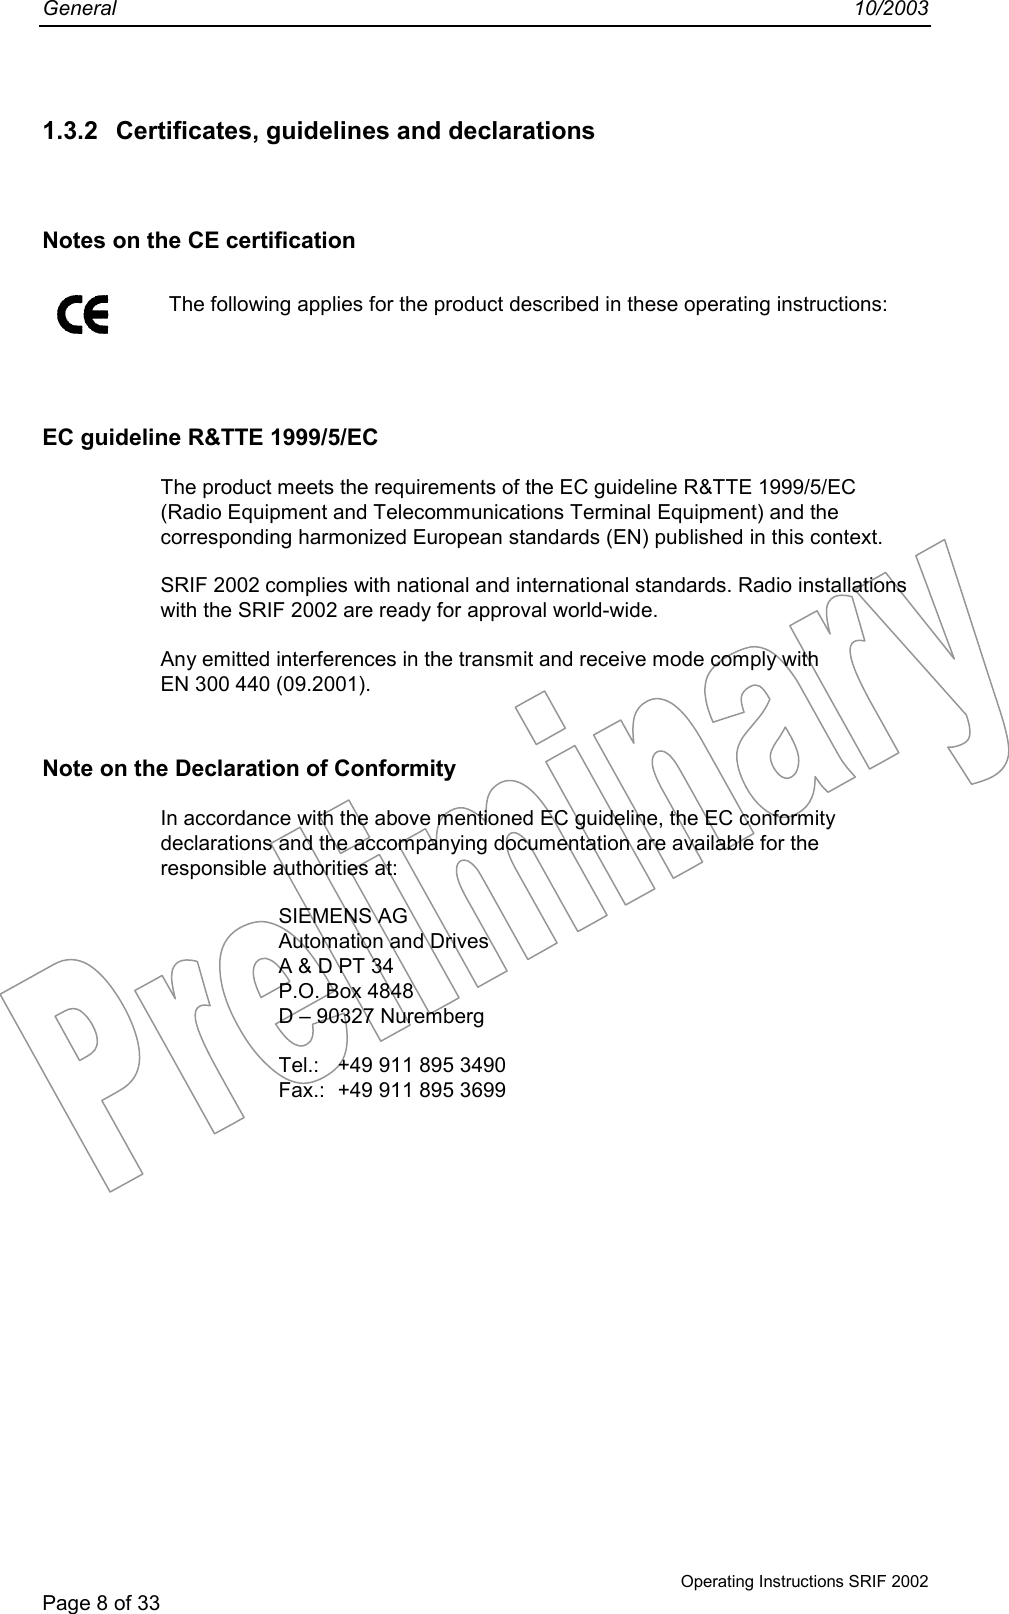 General 10/2003Operating Instructions SRIF 2002Page 8 of 331.3.2  Certificates, guidelines and declarationsNotes on the CE certification The following applies for the product described in these operating instructions:EC guideline R&amp;TTE 1999/5/ECThe product meets the requirements of the EC guideline R&amp;TTE 1999/5/EC(Radio Equipment and Telecommunications Terminal Equipment) and thecorresponding harmonized European standards (EN) published in this context.SRIF 2002 complies with national and international standards. Radio installationswith the SRIF 2002 are ready for approval world-wide.Any emitted interferences in the transmit and receive mode comply withEN 300 440 (09.2001).Note on the Declaration of ConformityIn accordance with the above mentioned EC guideline, the EC conformitydeclarations and the accompanying documentation are available for theresponsible authorities at:SIEMENS AGAutomation and DrivesA &amp; D PT 34P.O. Box 4848D – 90327 NurembergTel.: +49 911 895 3490Fax.: +49 911 895 3699